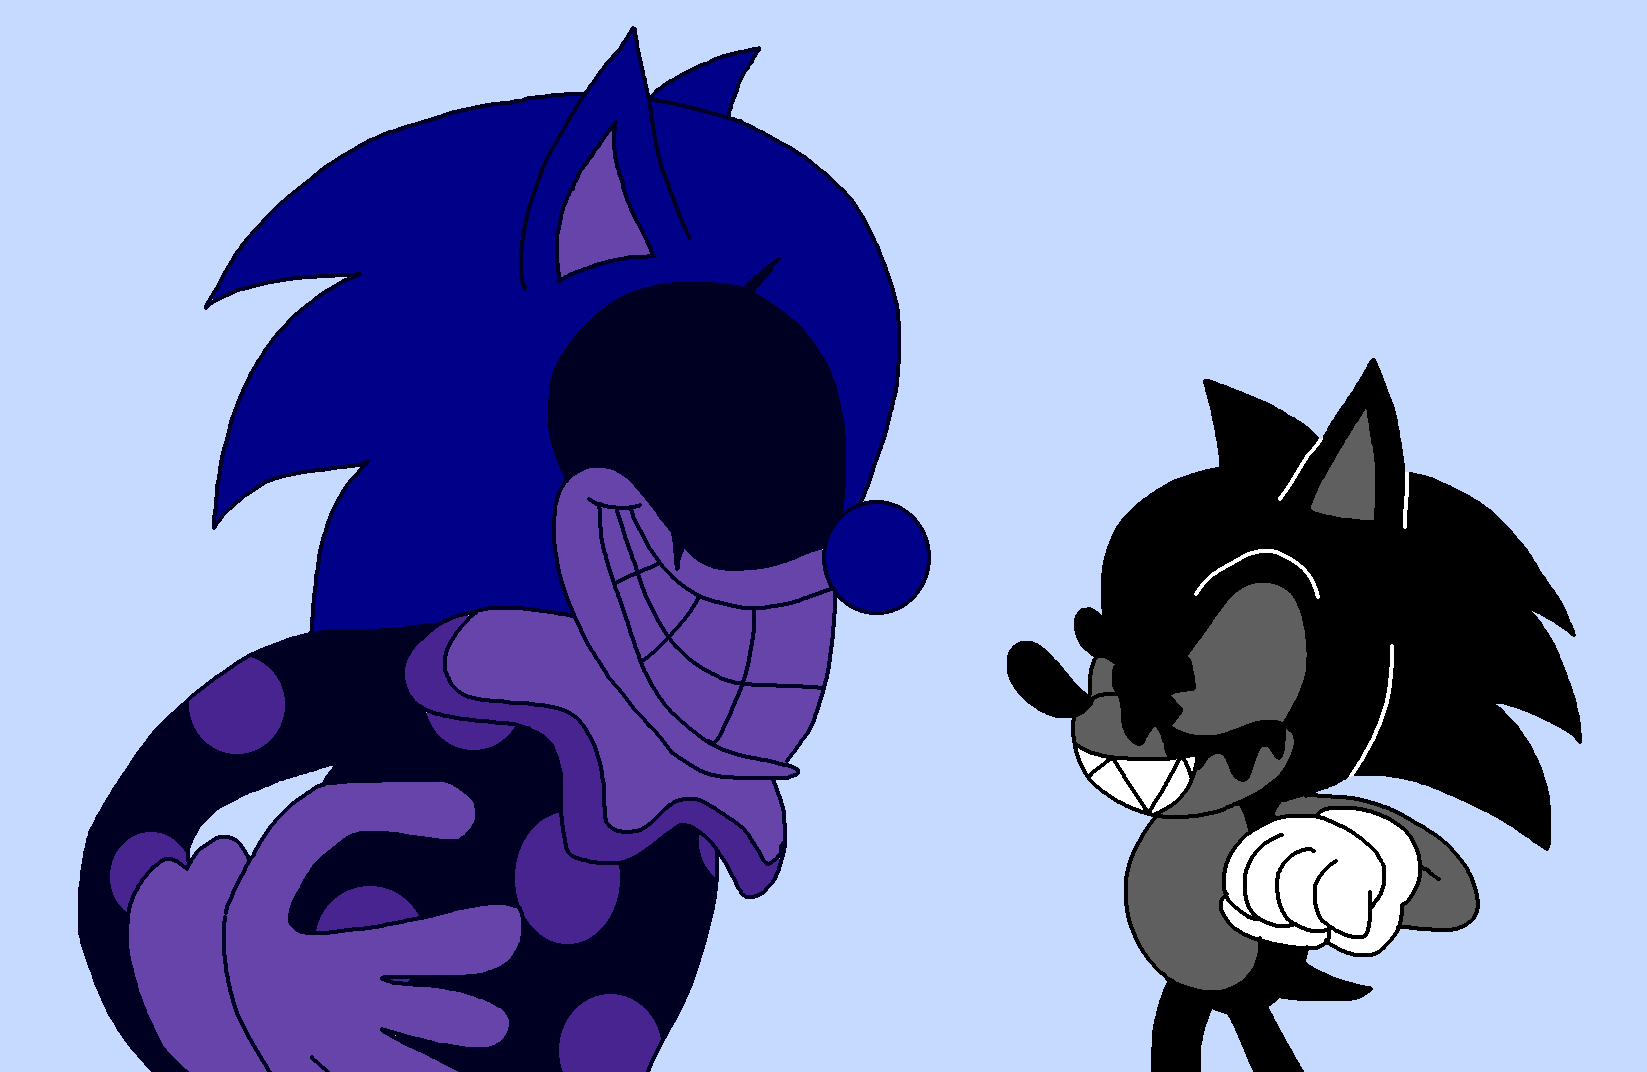 Sonic exe, Lord x and Majin sonic by richsquid1996 on DeviantArt